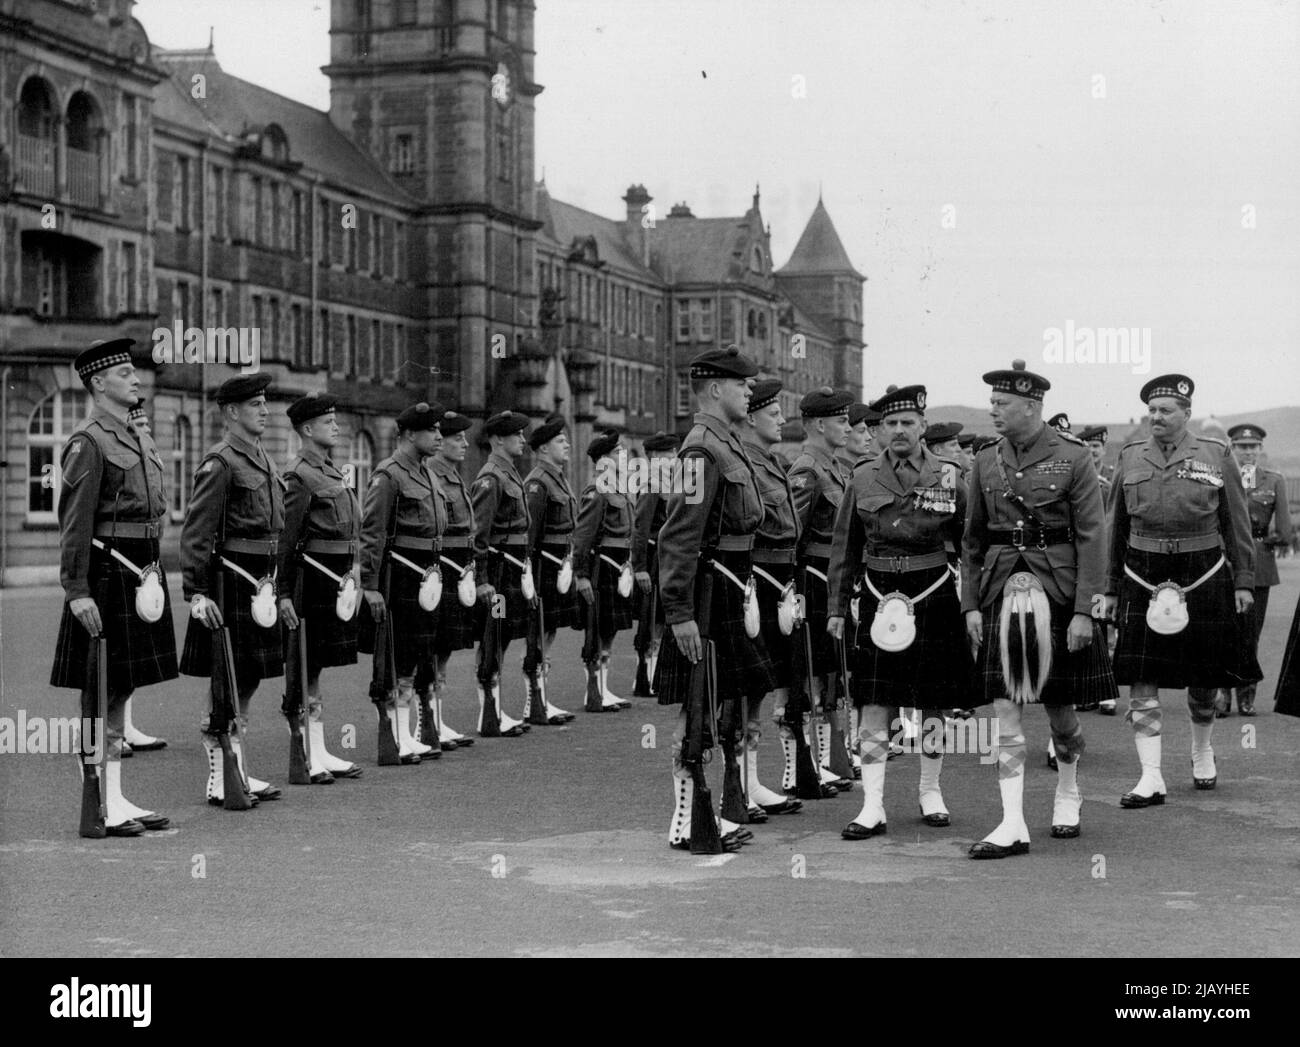 Duke of Gloucester Inspects Gordon Highlanders -- The Duke of Gloucester, accompanied by senior officers, inspecting the Gordon highlanders on the barrack square yesterday. The Duke of Gloucester, keeping a promise made to officers and men of the 1st. Battalion, the Gordon highlanders, when they arrived in this country in April after a three years Bandit hunting in Malaya, visited the Battalion at Redford Barraci Edinburgh, yesterday. To give their colonel-in-chief an insight into their campaigning in Malaya, the Gordons Demonstrated the weapons used in combating the terrorists, etc. June 25, Stock Photo